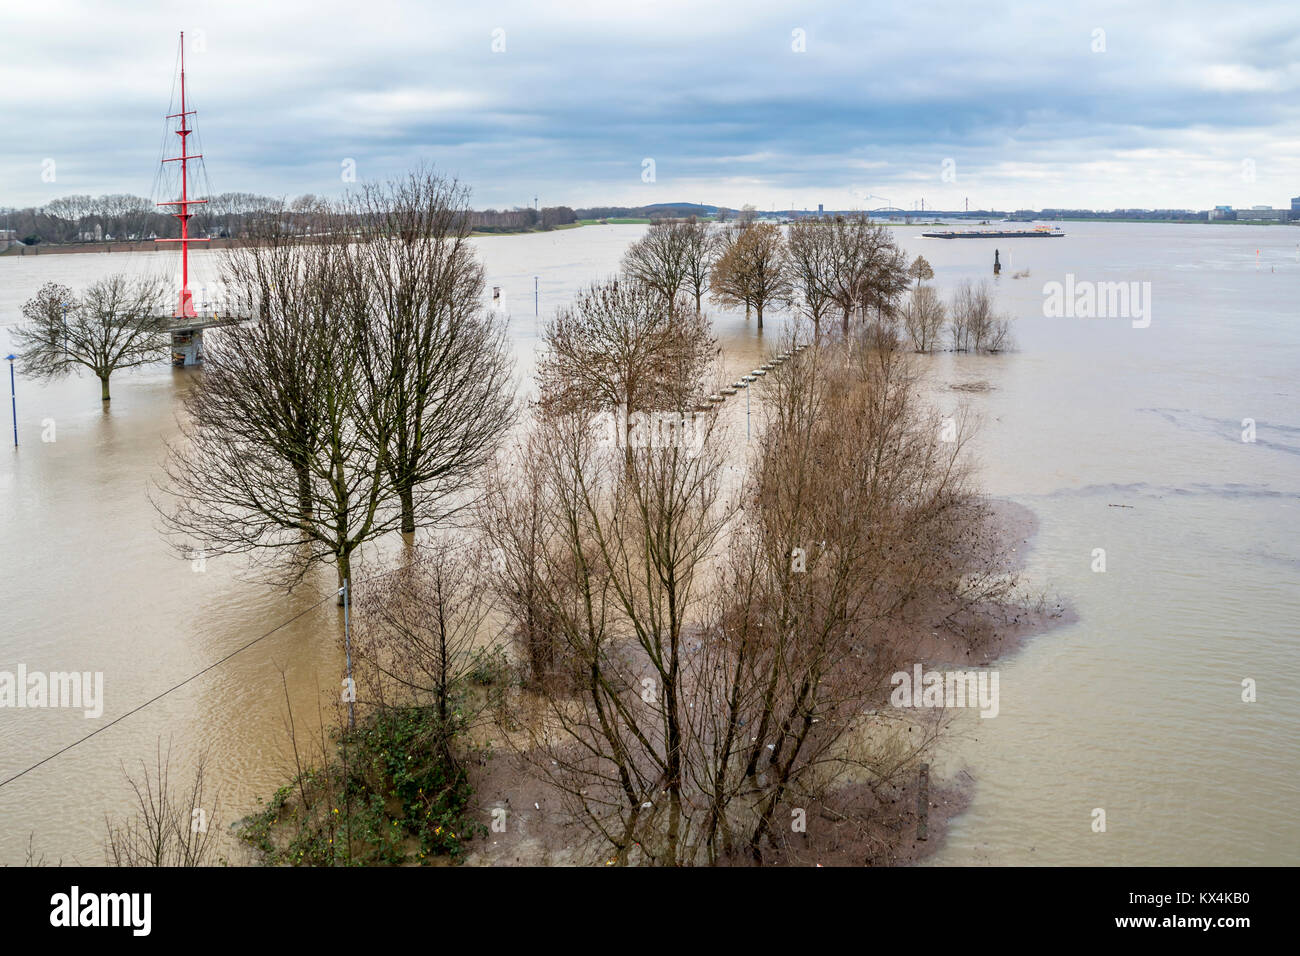 The river Rhine is flooding the city of Duisburg, Germany Stock Photo